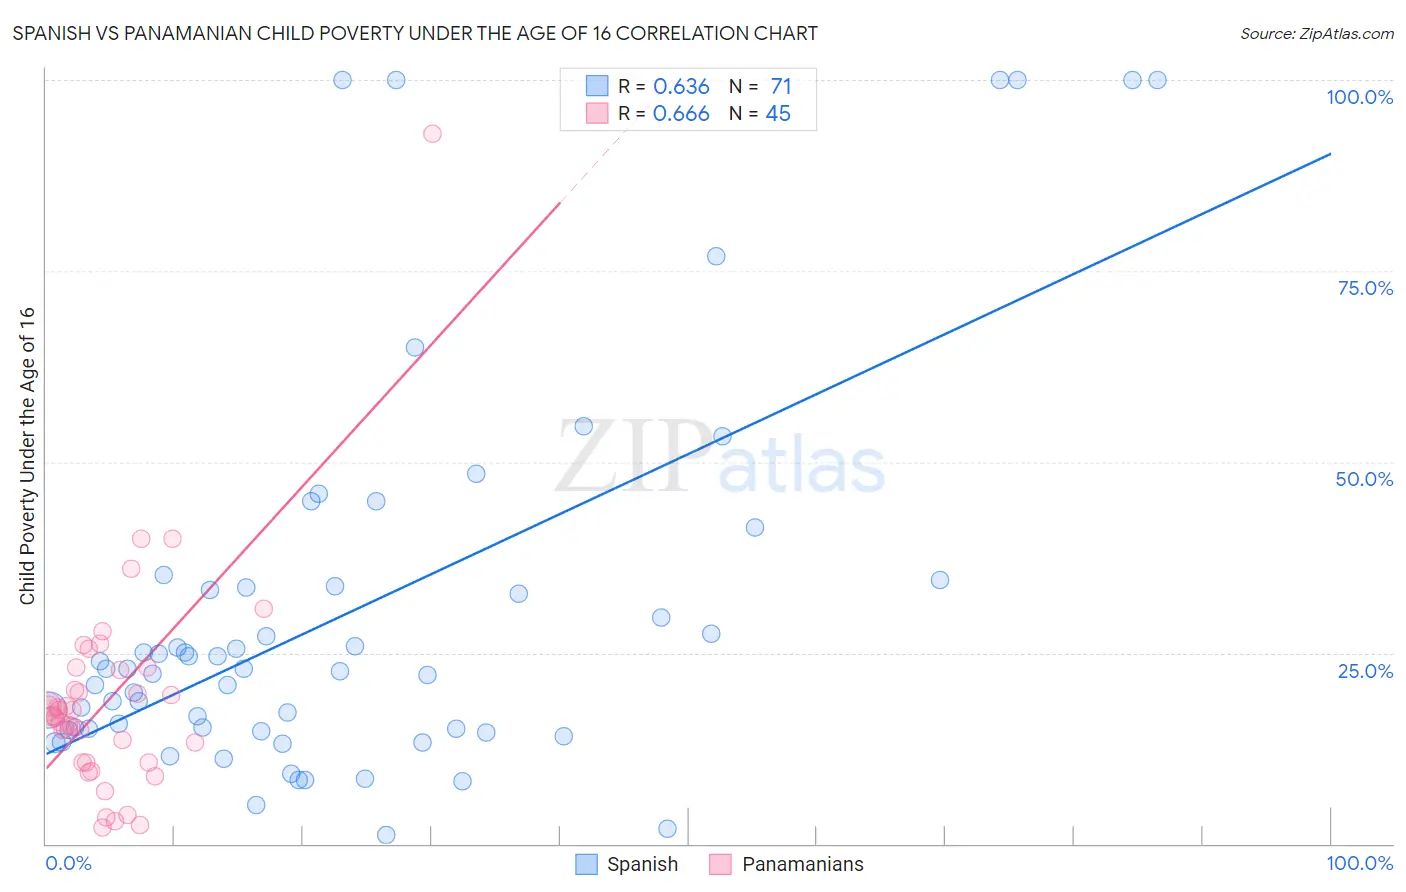 Spanish vs Panamanian Child Poverty Under the Age of 16